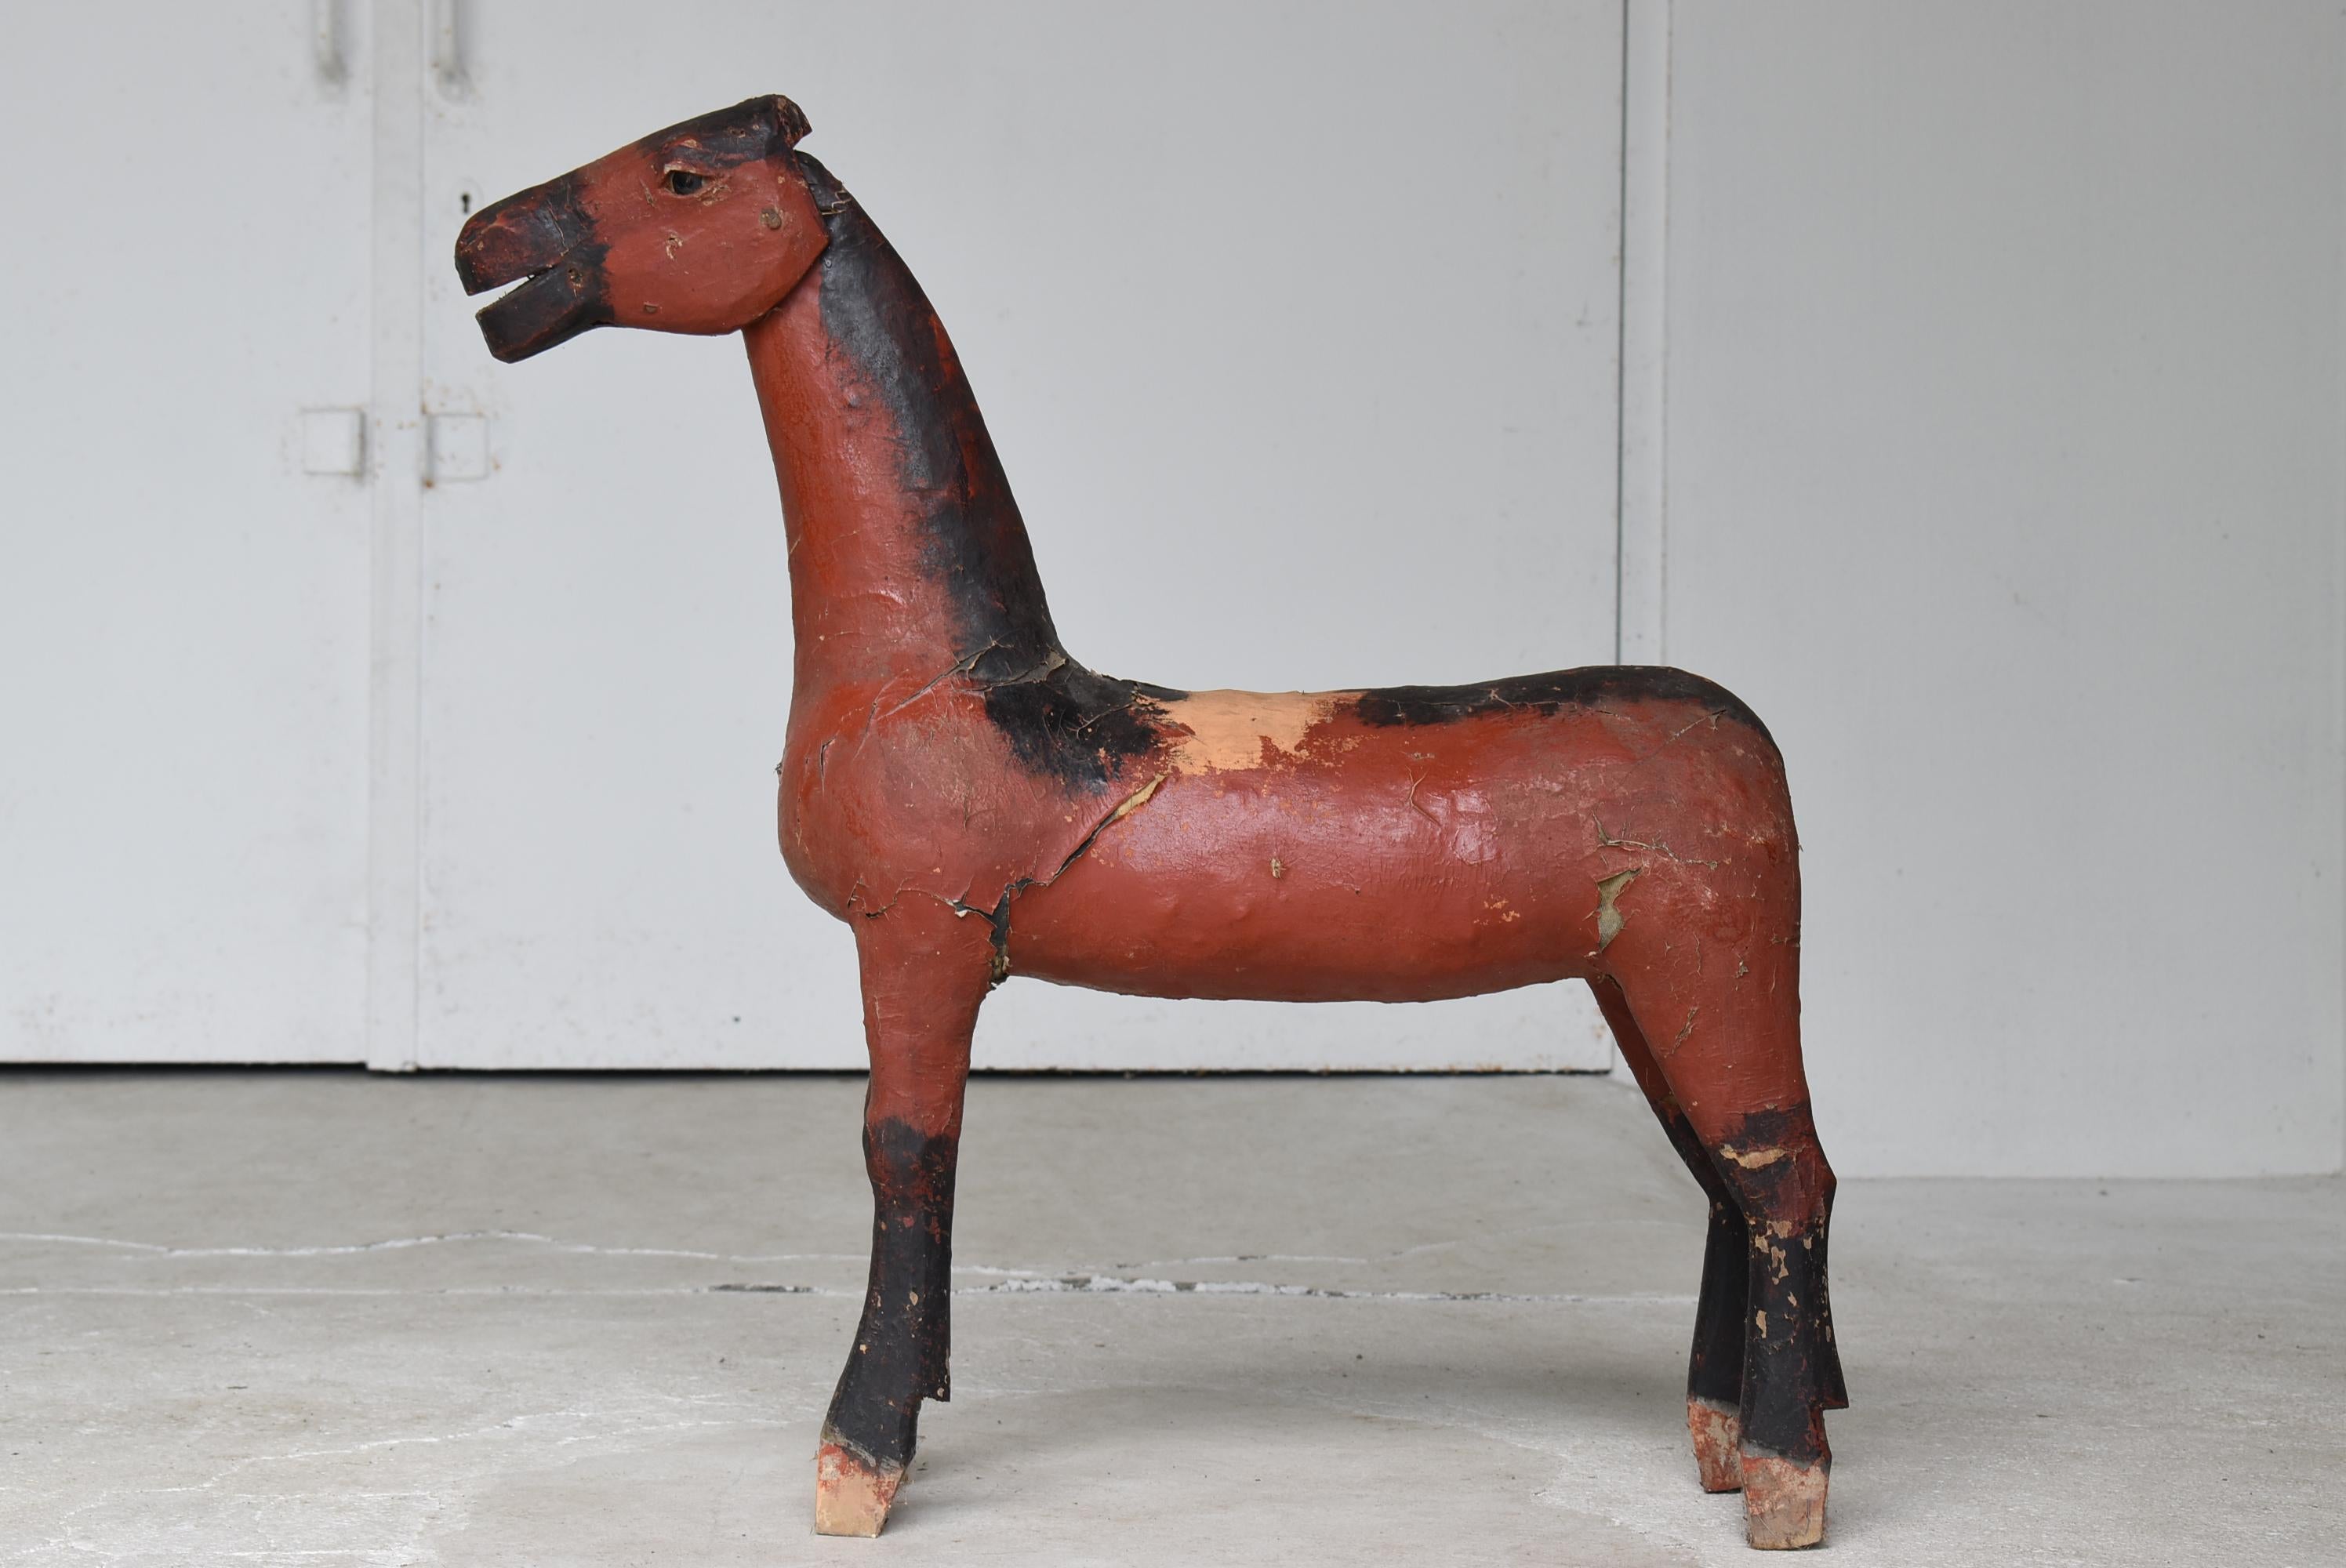 It is an old Japanese wood carving horse.

It is from the Edo period.
It is painted with lacquer.

In Japan, there has been a culture of dedicating horses to shrines for a long time.
In modern times, the culture has faded and no such wood